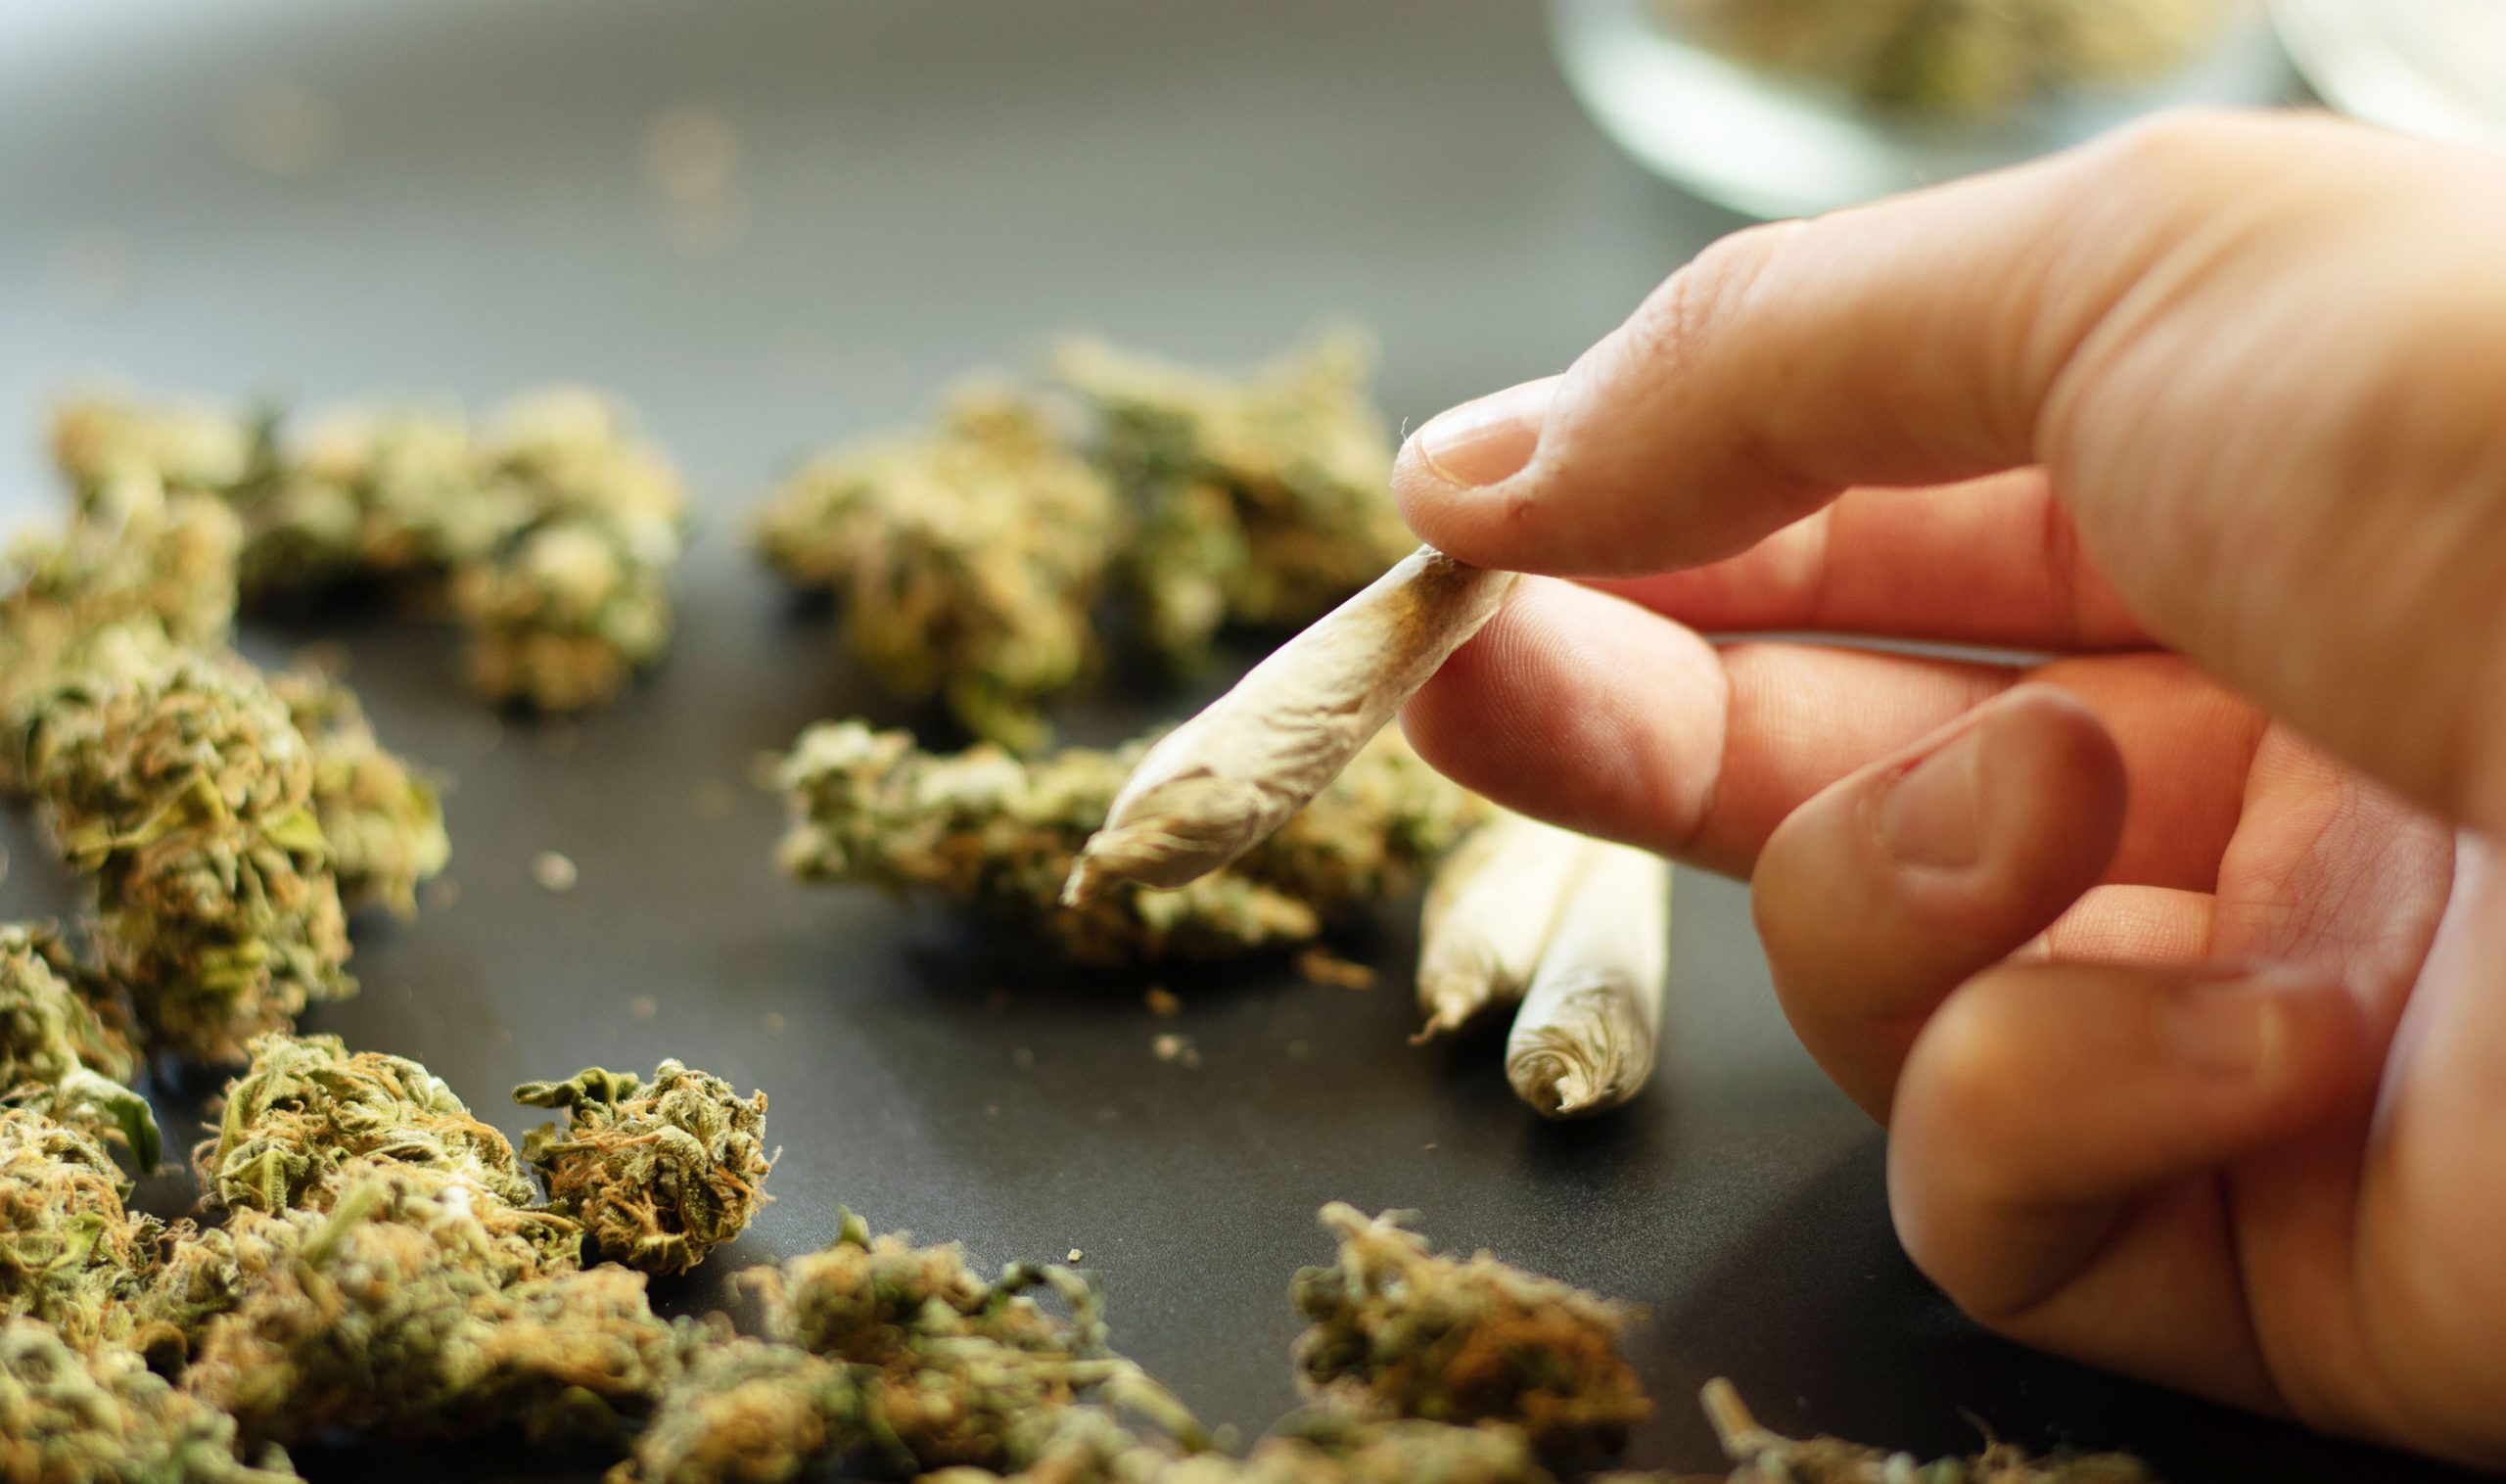 5 Quick & Easy Ways to Grind Up Your Weed Without A Grinder